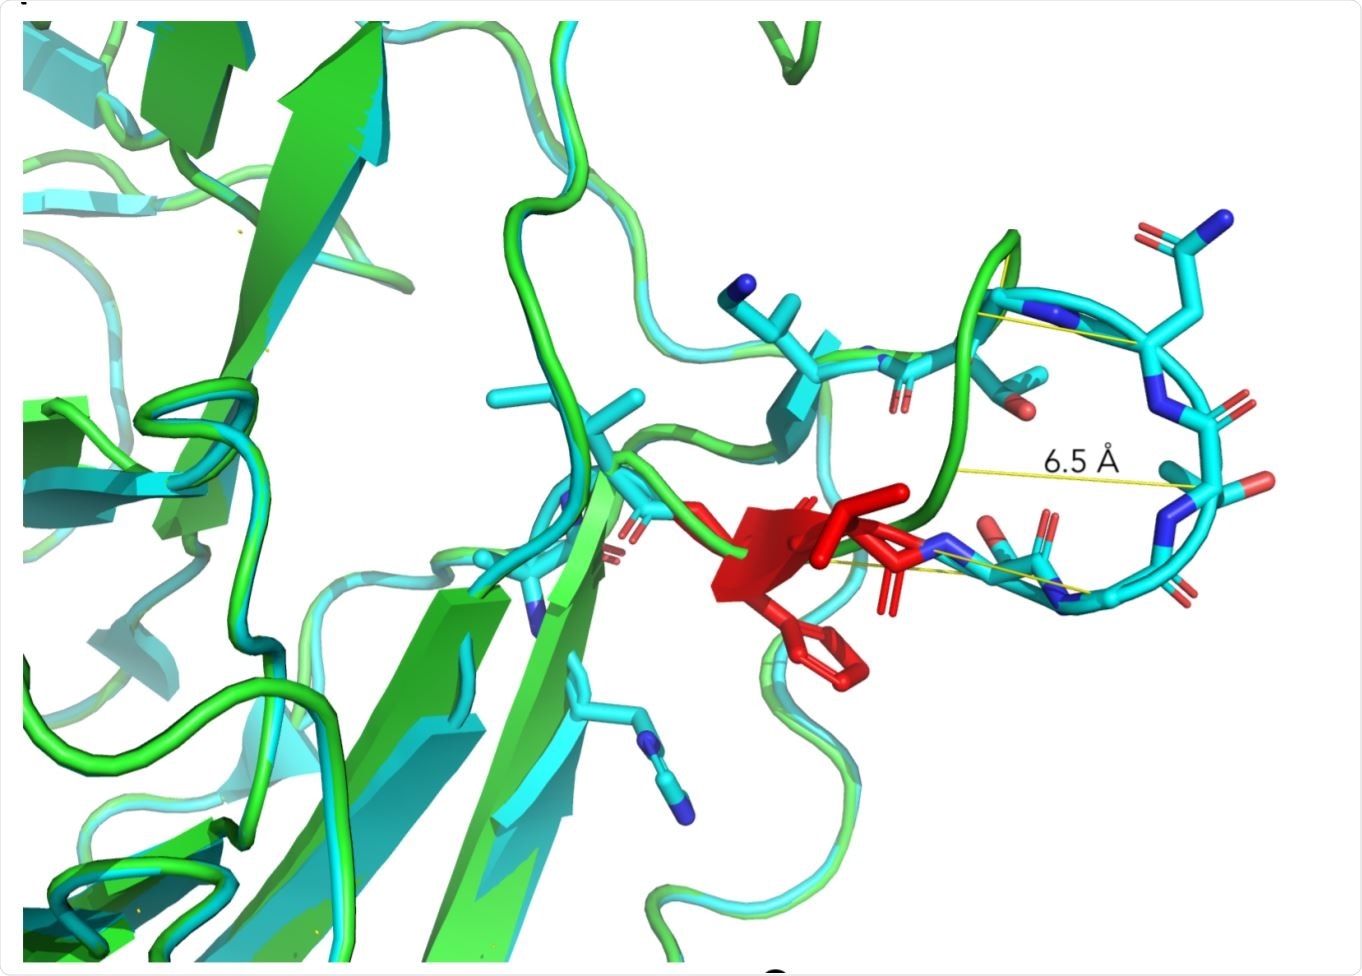 Structural aspects of ΔH69/V70